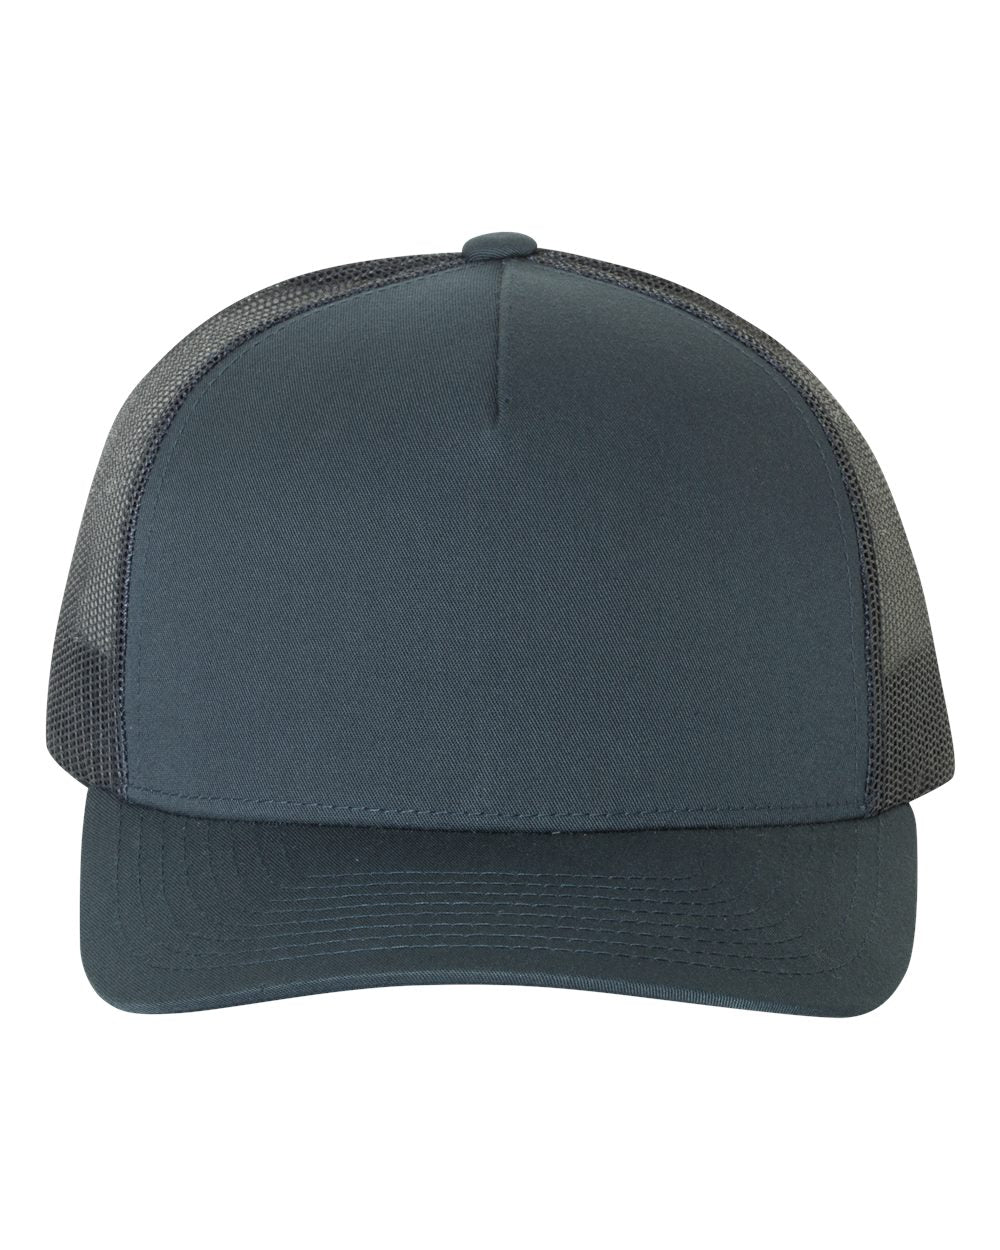 12 Leather Patch Hats